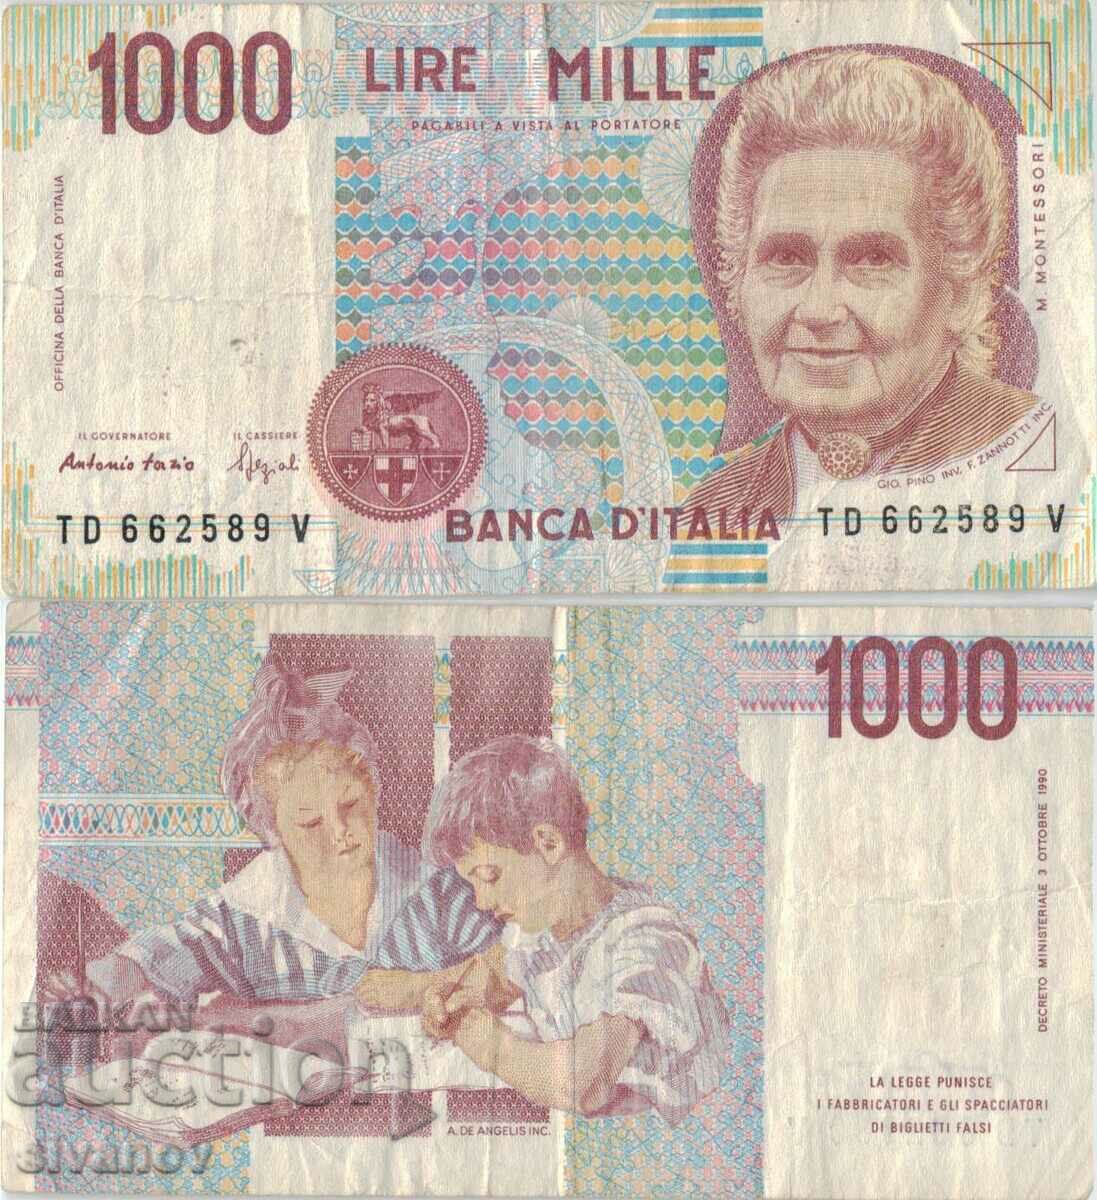 Italy 1000 Lire 1990 Banknote #5177